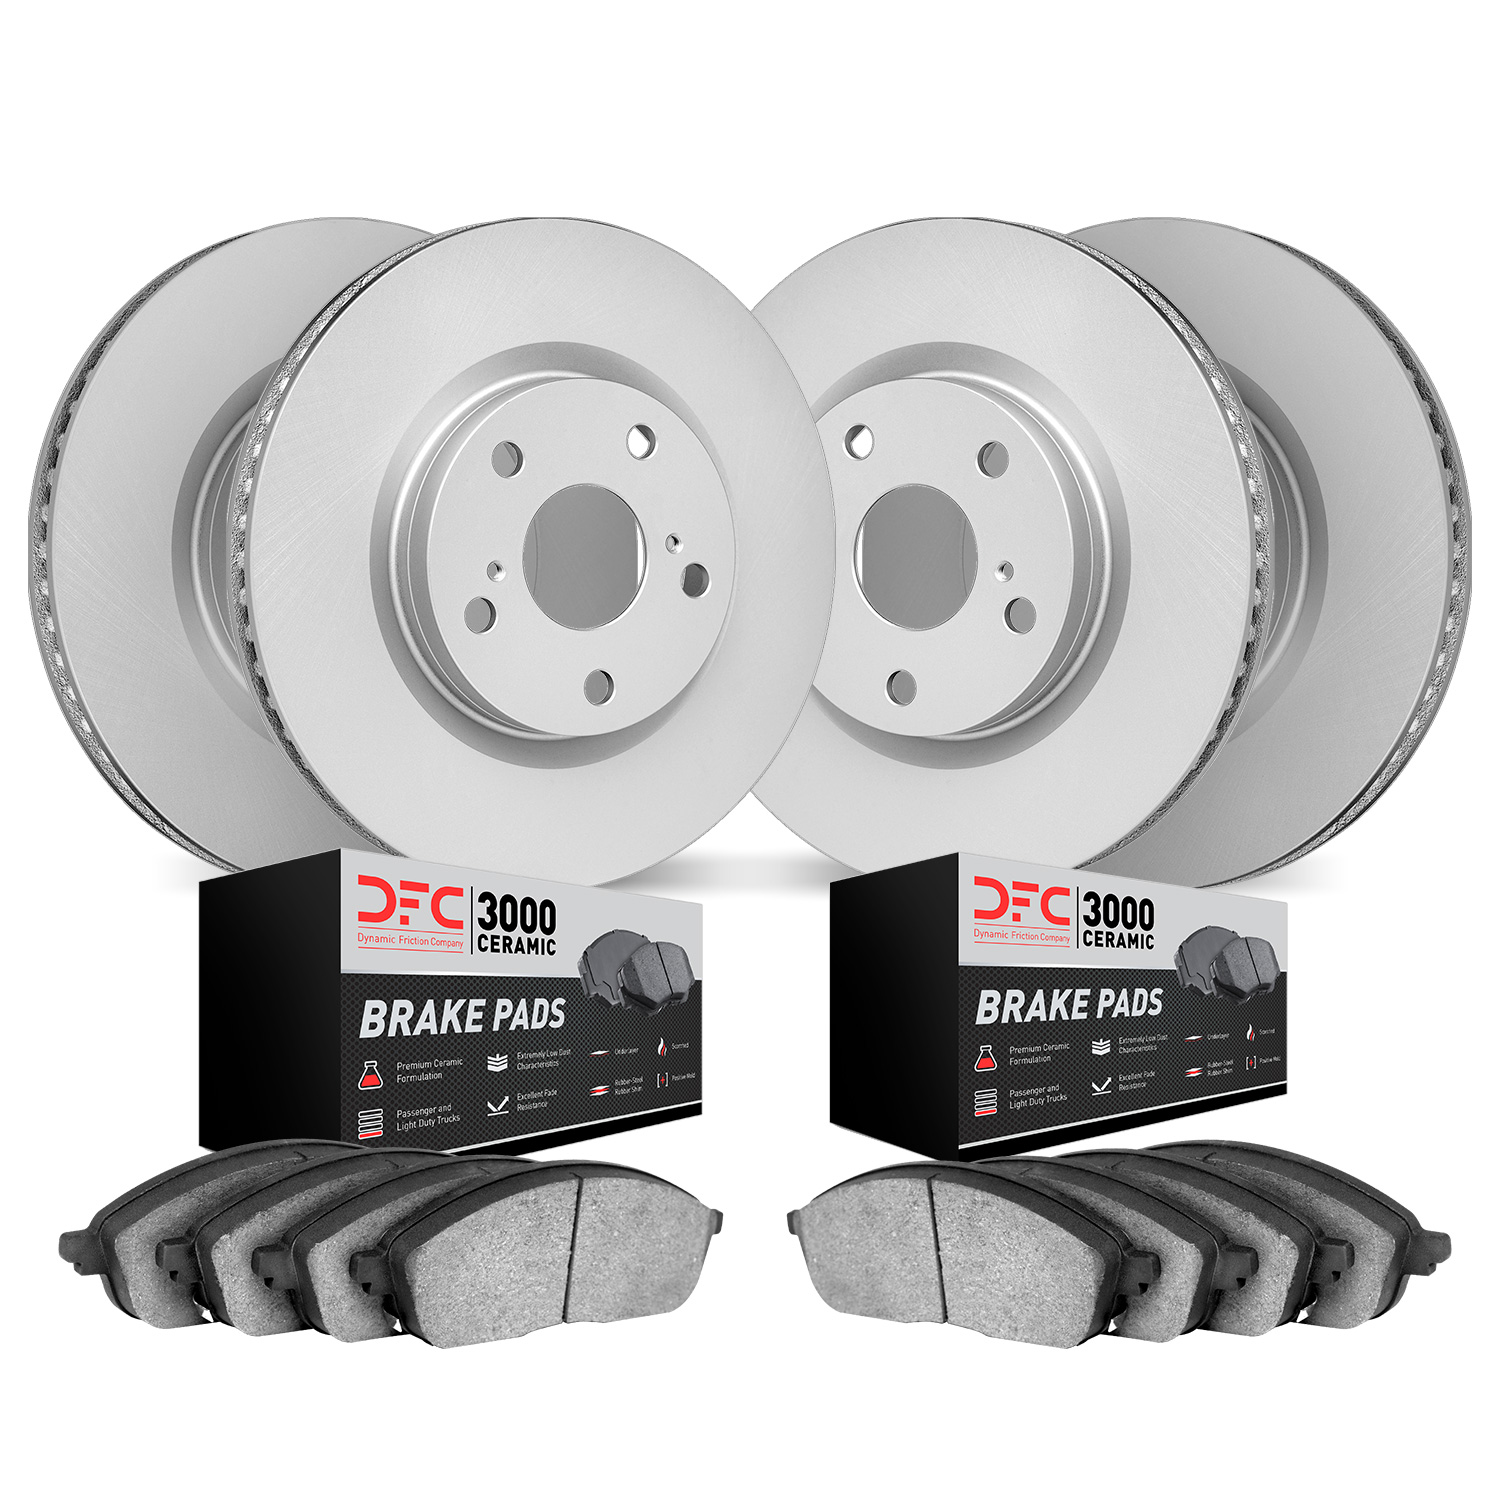 4304-75001 Geospec Brake Rotors with 3000-Series Ceramic Brake Pads Kit, 1992-2000 Lexus/Toyota/Scion, Position: Front and Rear